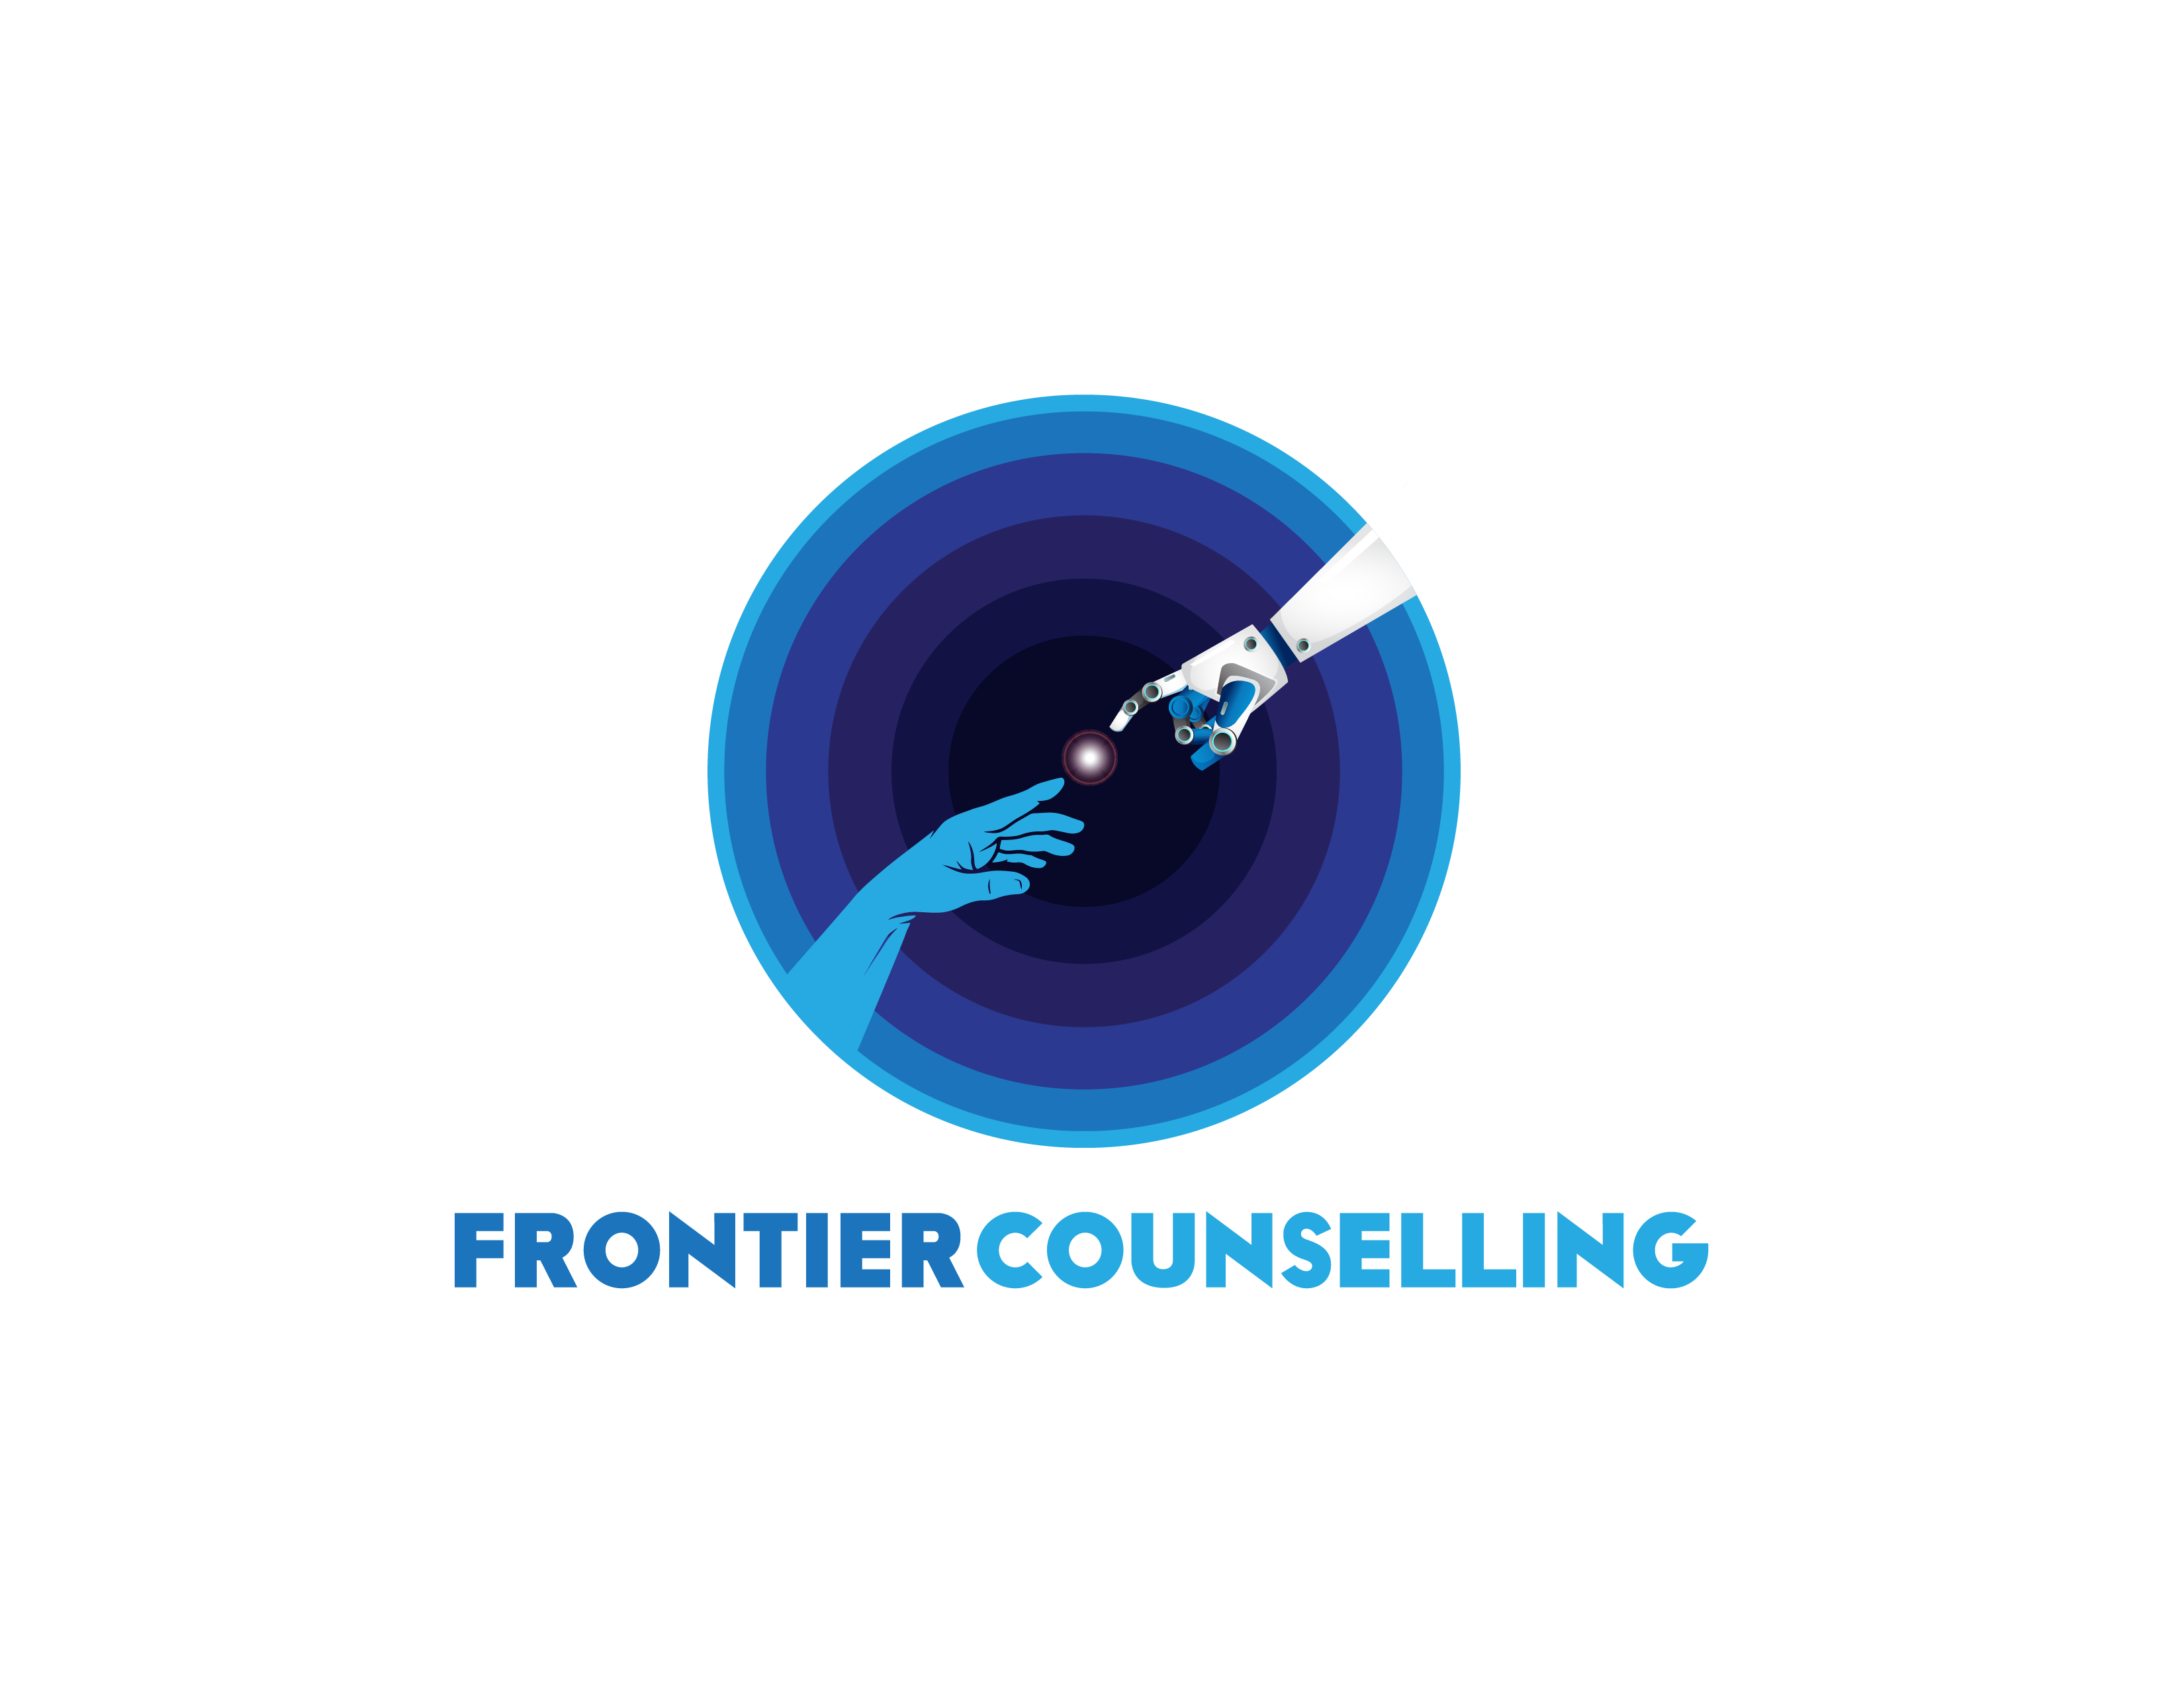 Frontier Counselling